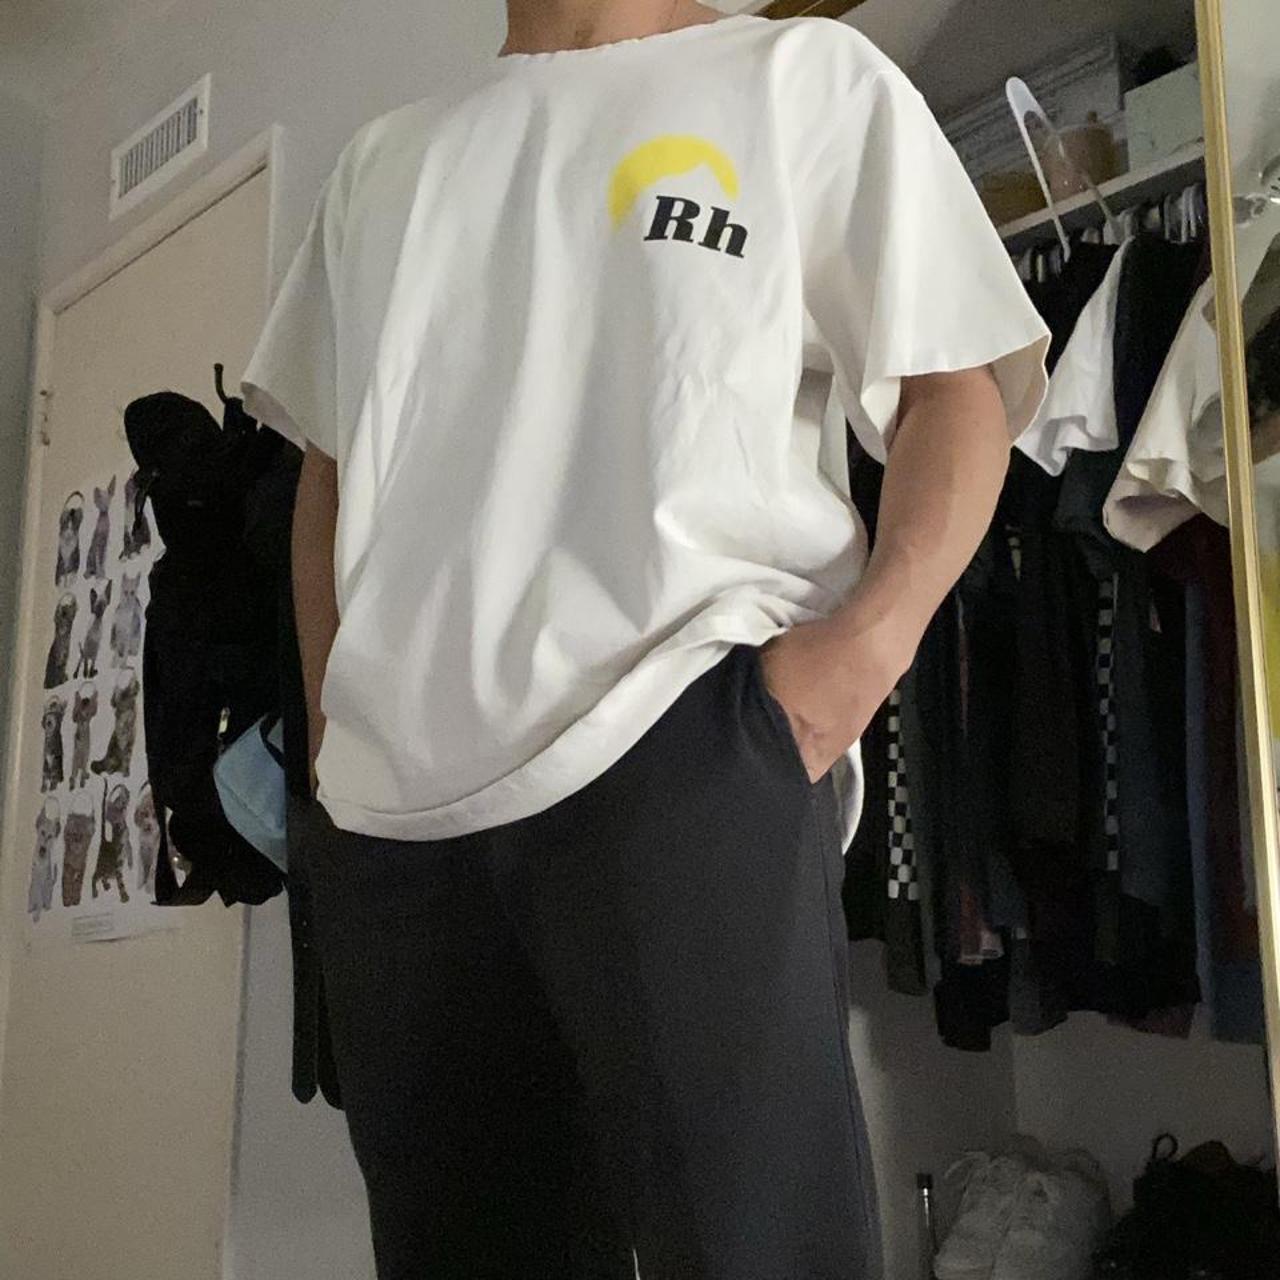 Product Image 1 - Vintage Rhude Mountain Tee🤍💛
This is